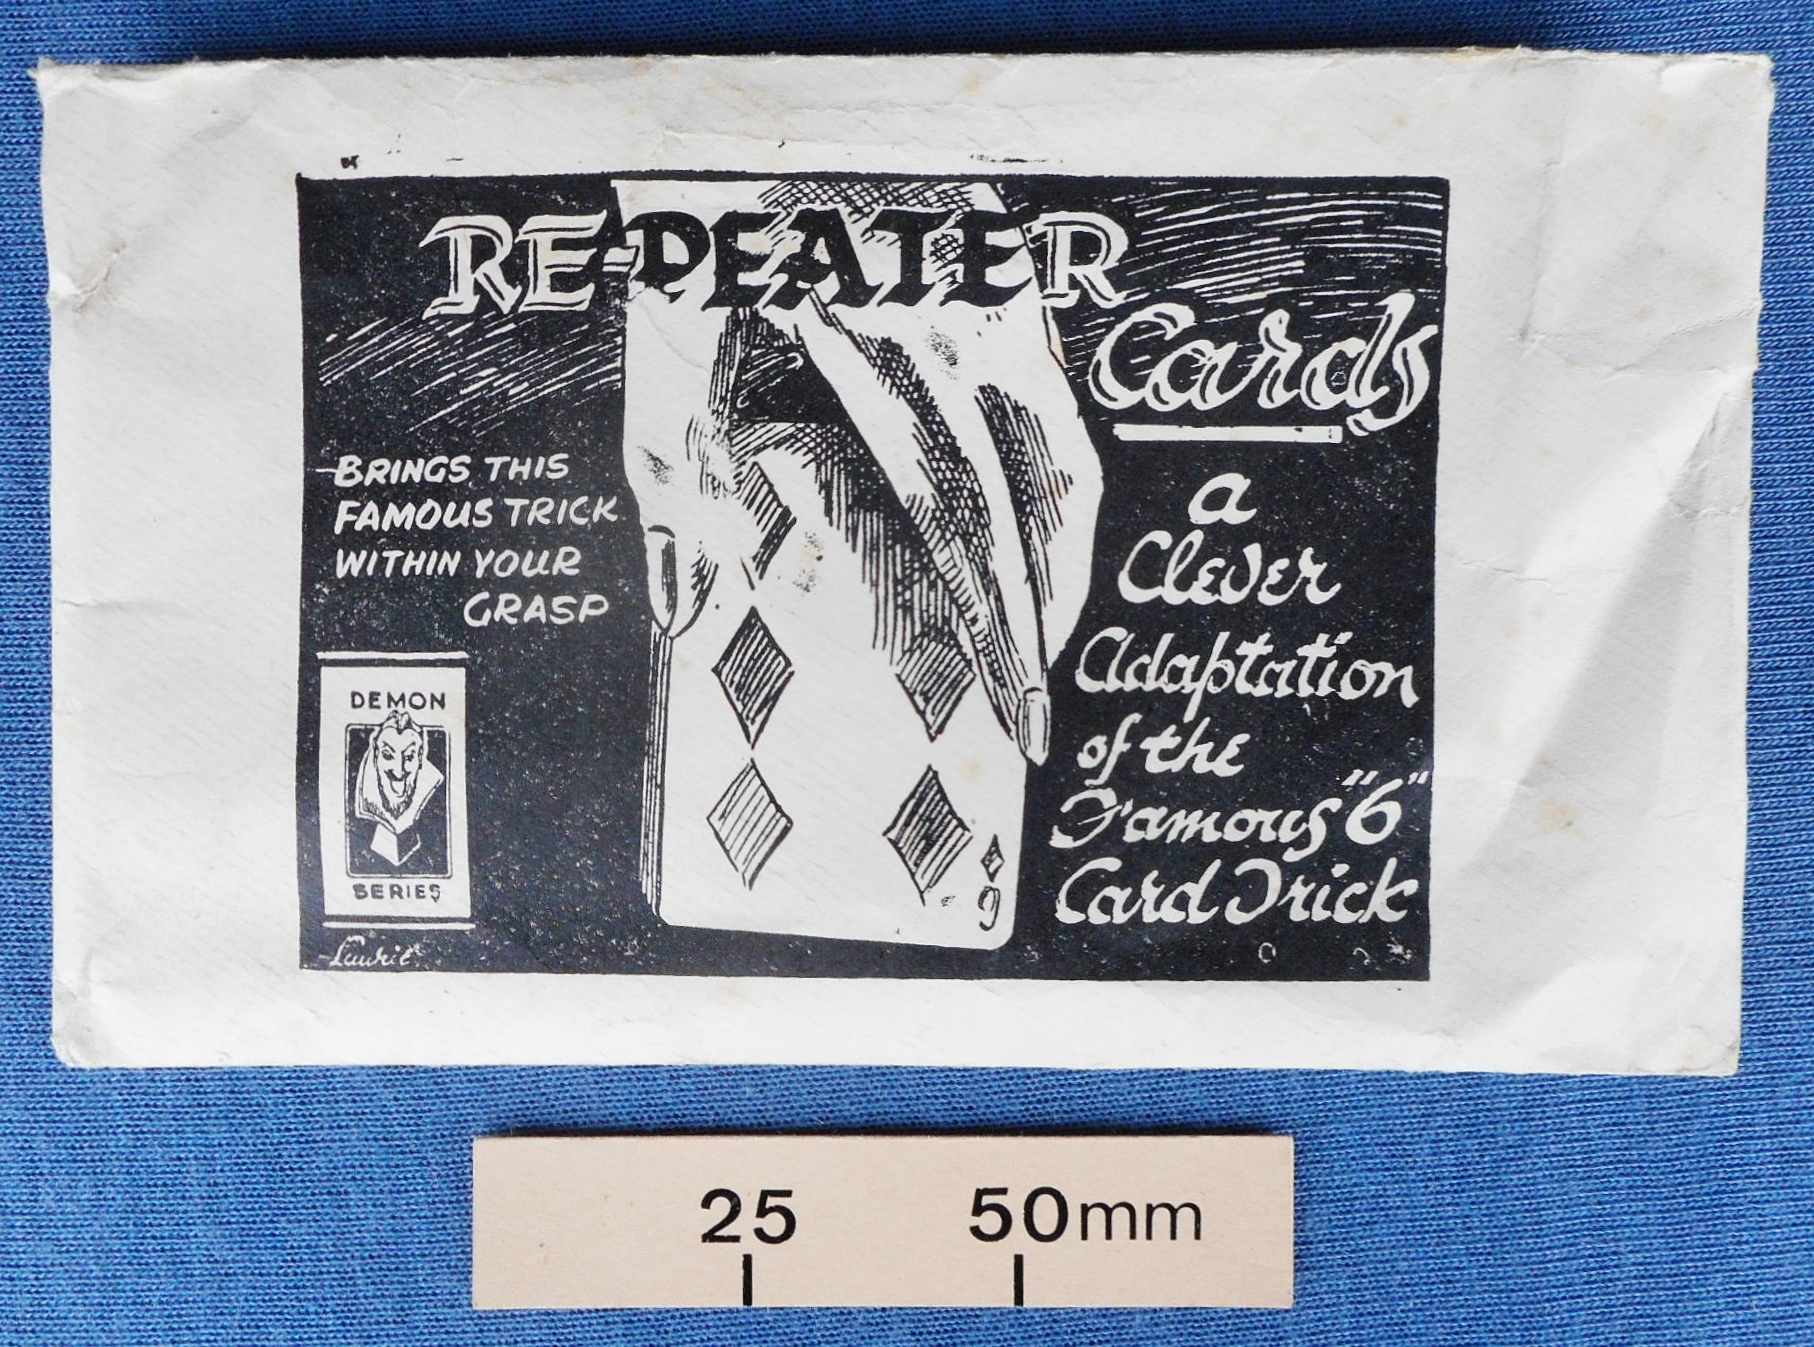 Repeater Cards – a version of 6 Card Repeat